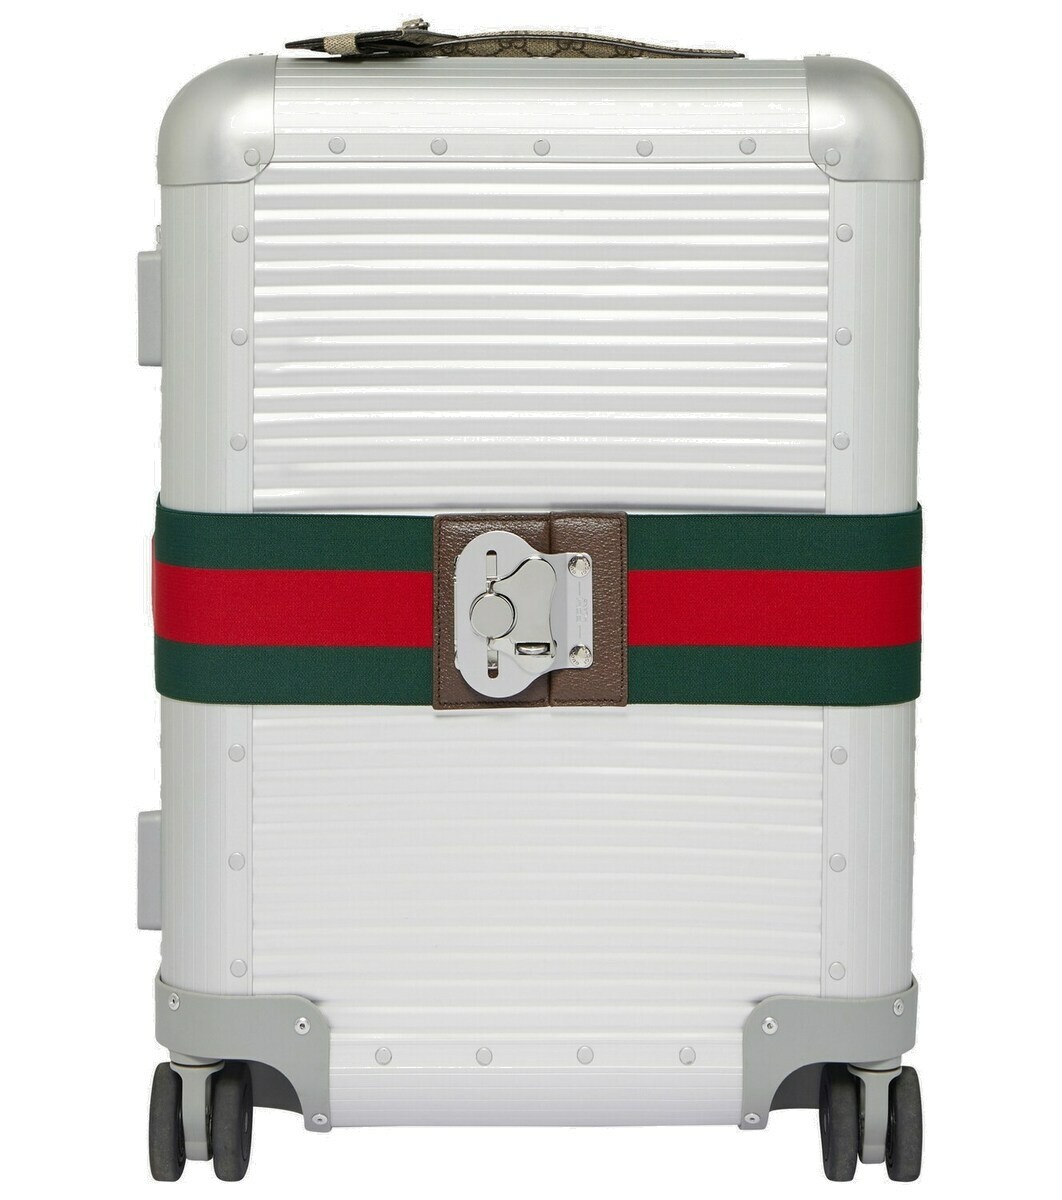 Photo: Gucci Gucci Porter carry-on suitcase